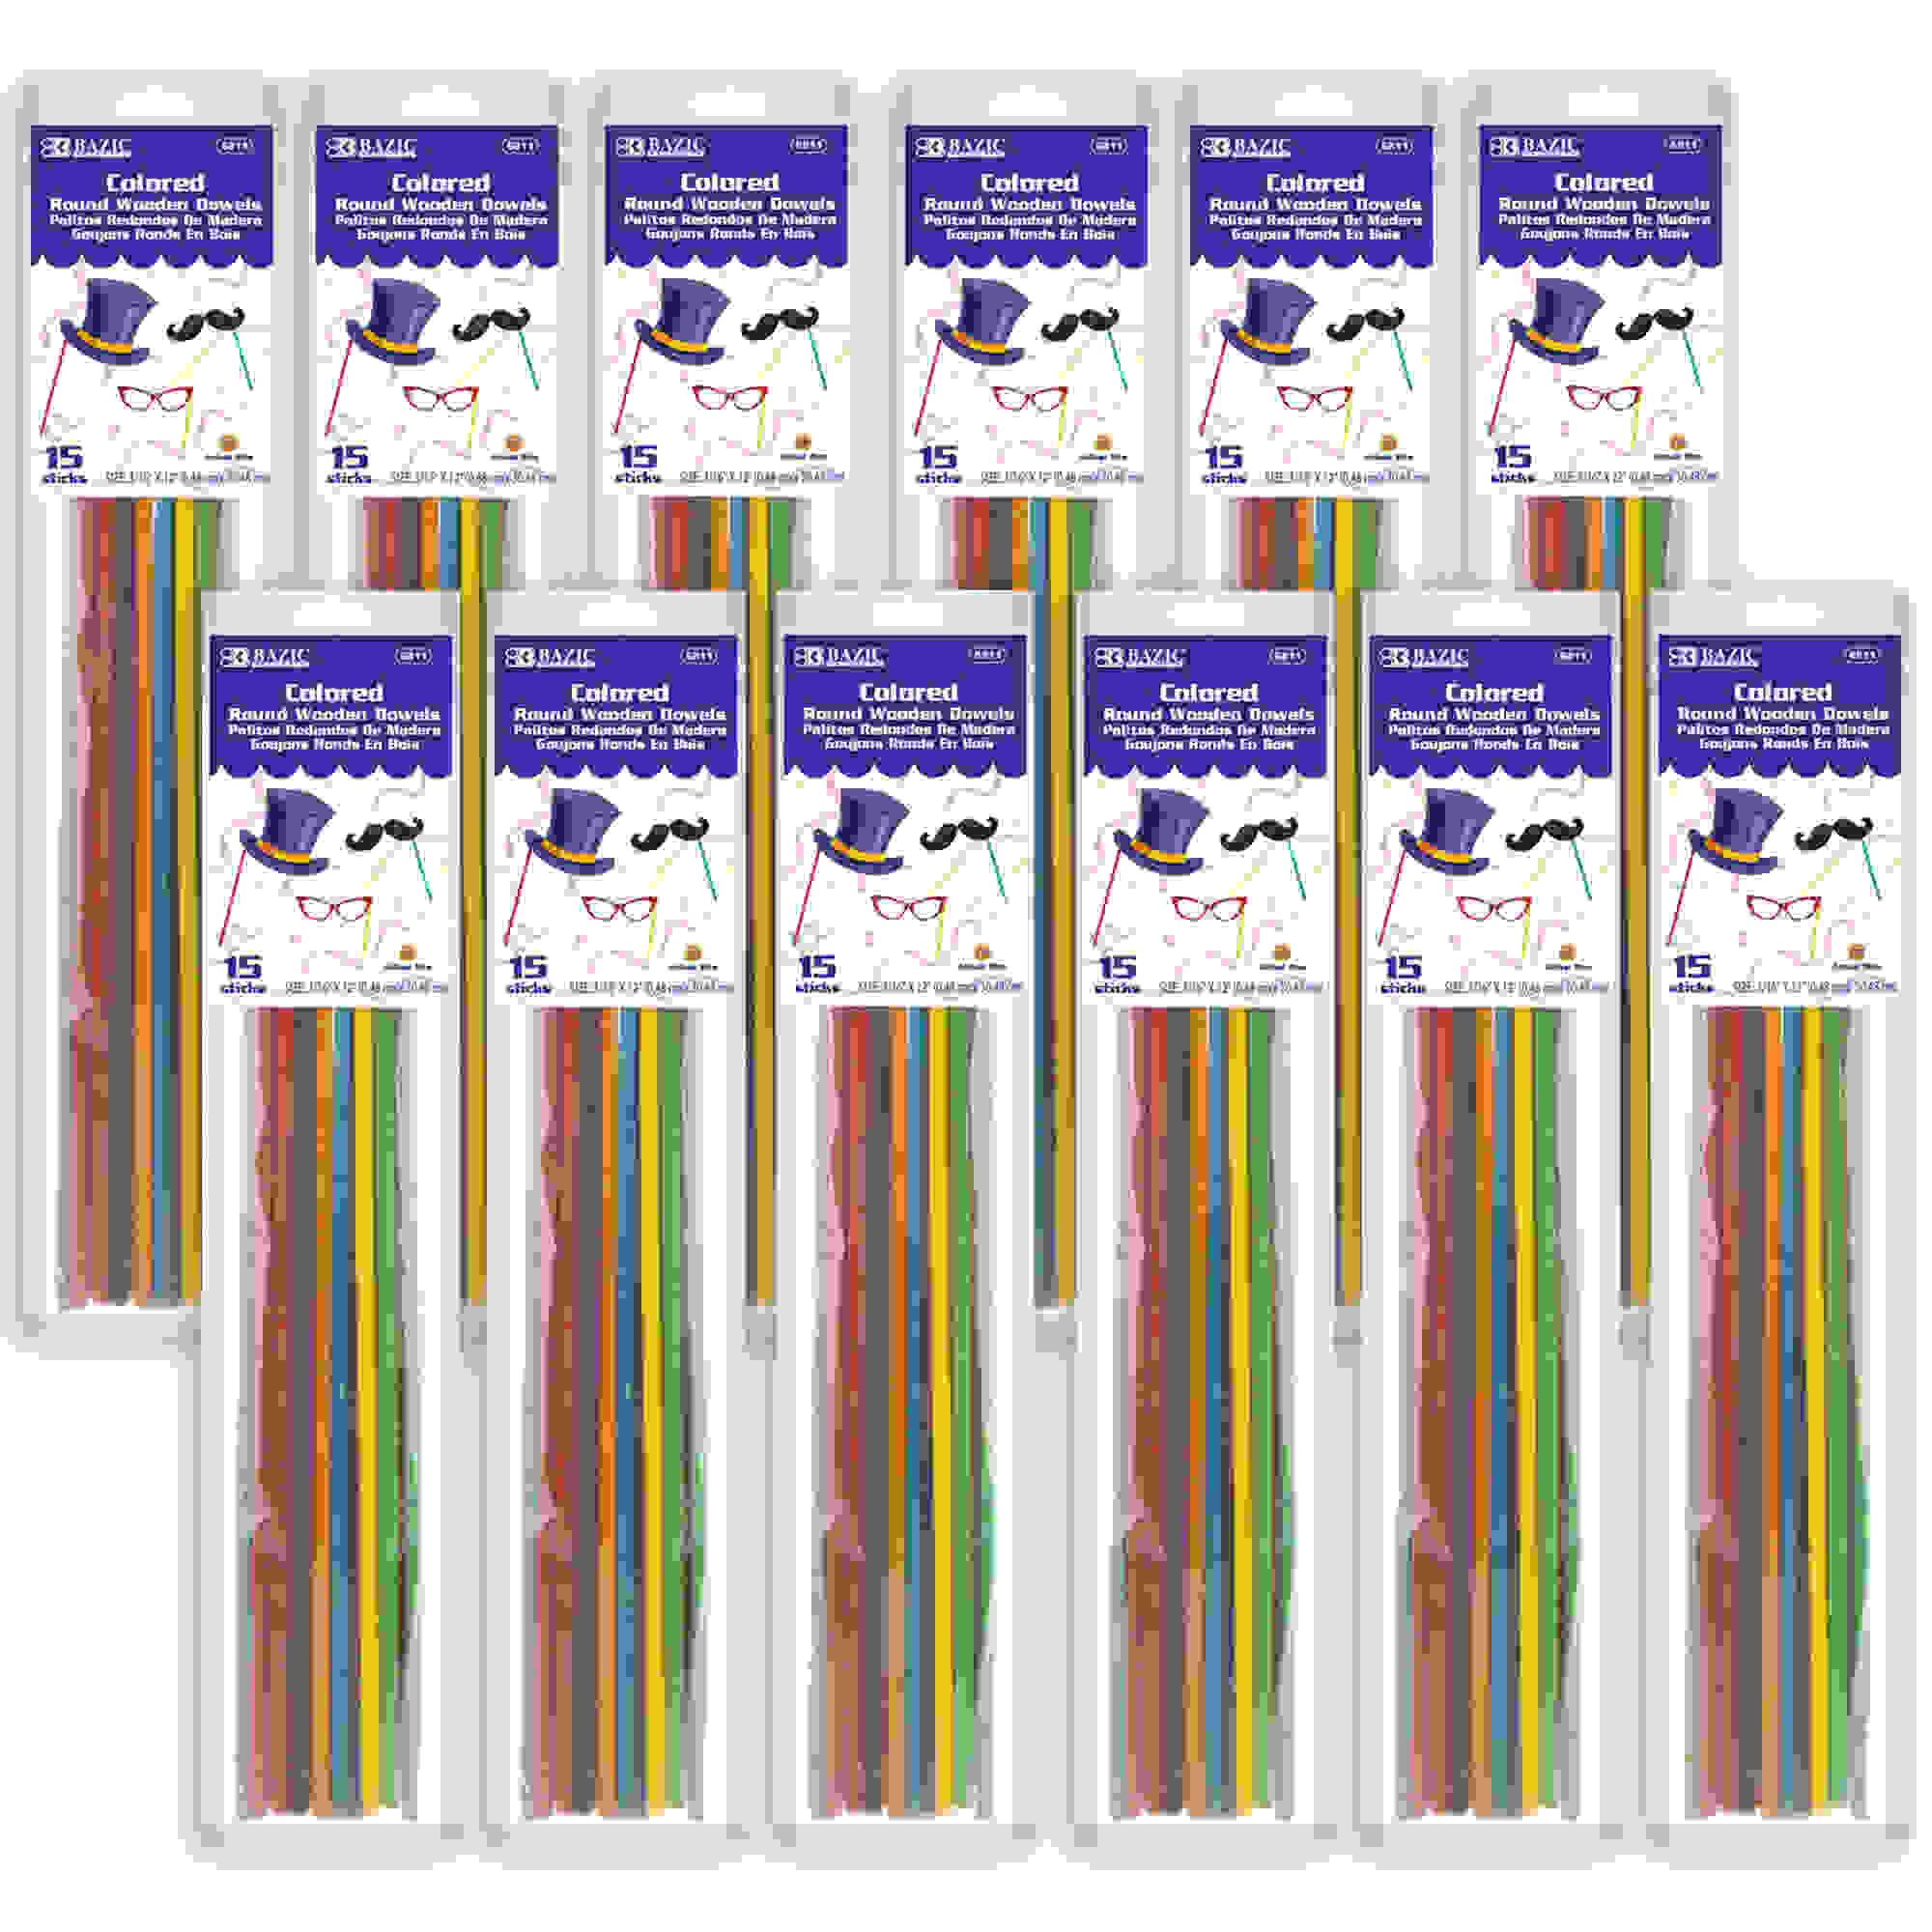 Round Multi-Colored Wooden Dowel, 3/16" x 12", 15 Per Pack, 12 Packs